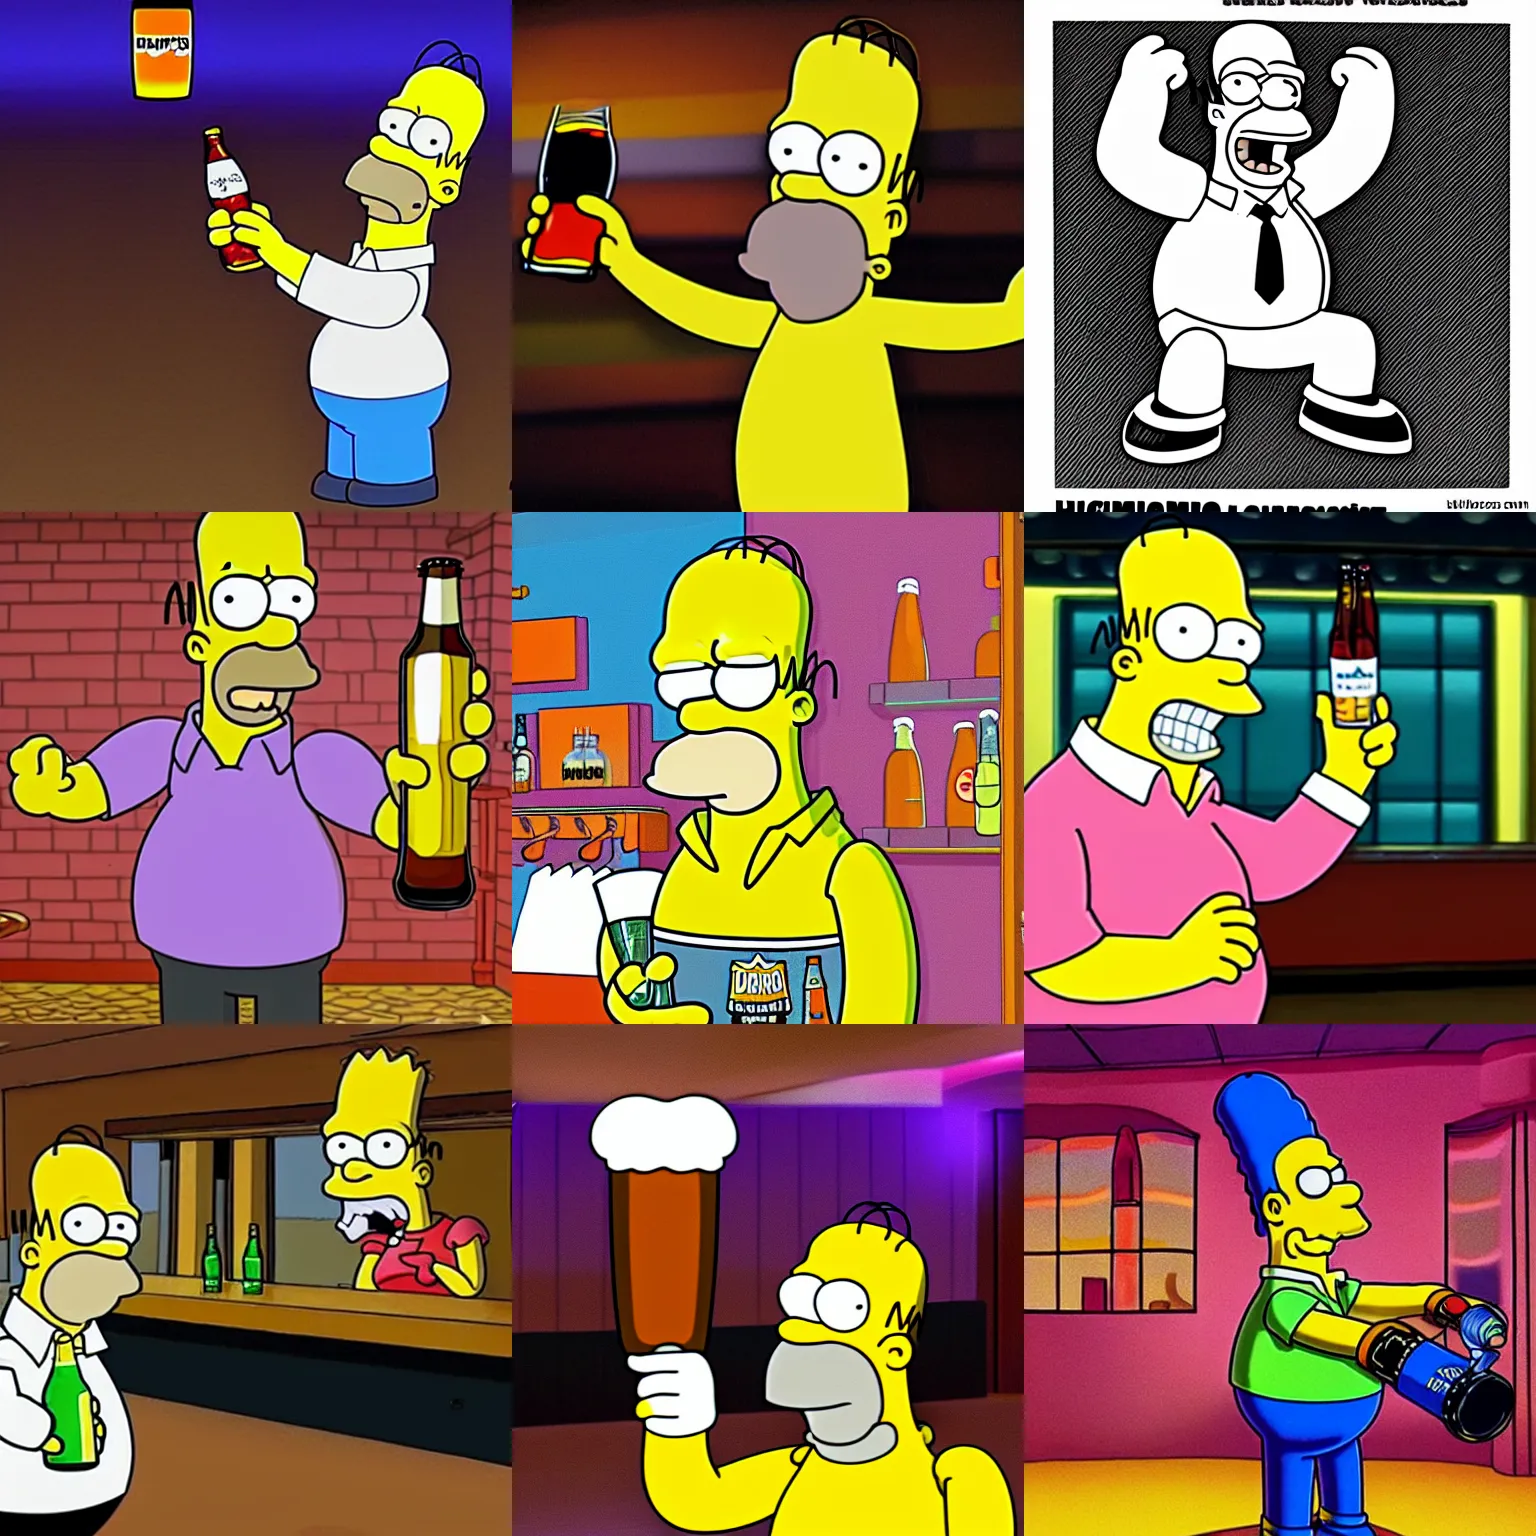 Prompt: Homer Simpson in a night club dancing with a beer bottle